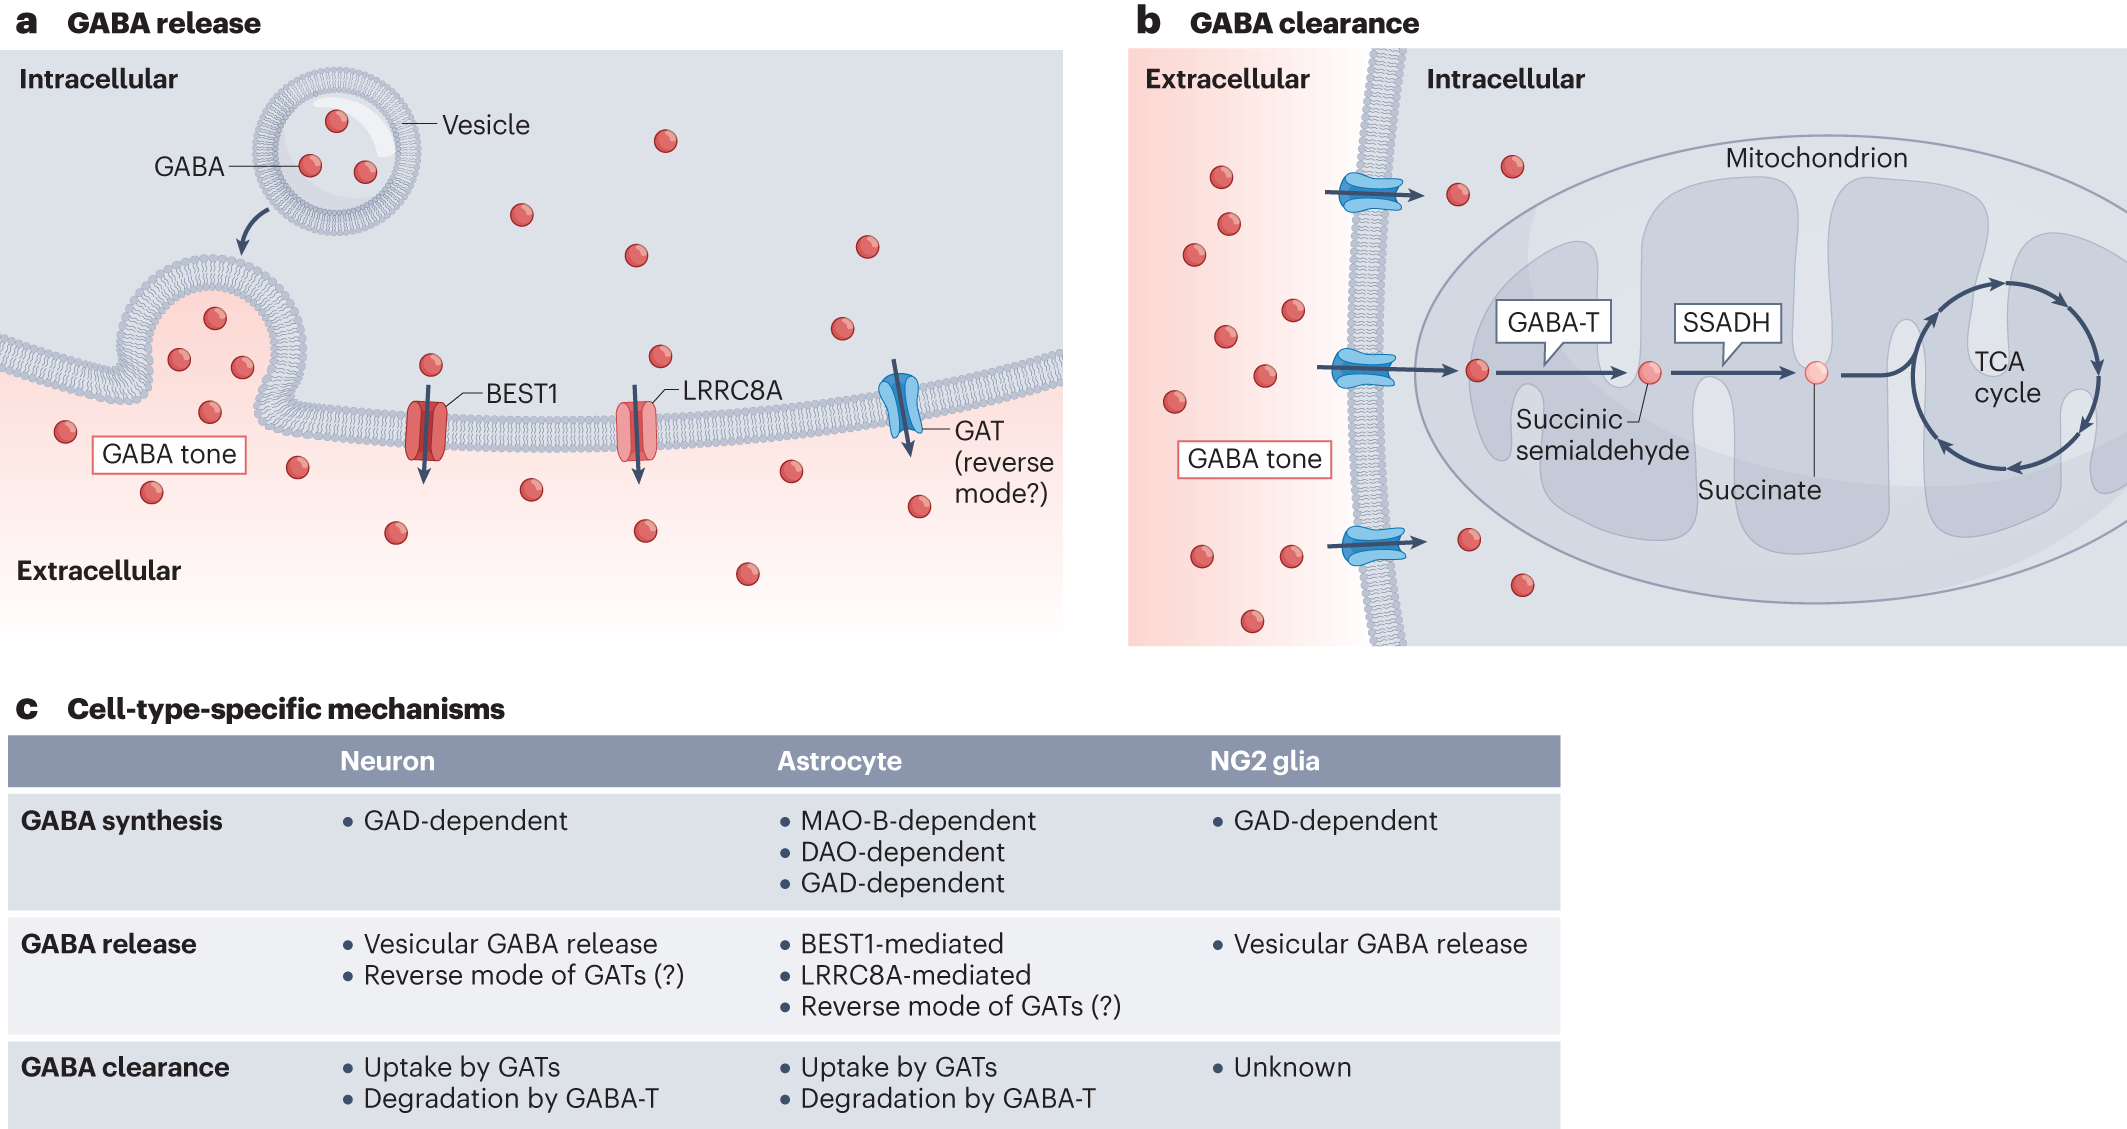 GABA tone regulation and its cognitive functions in brain | Nature Neuroscience